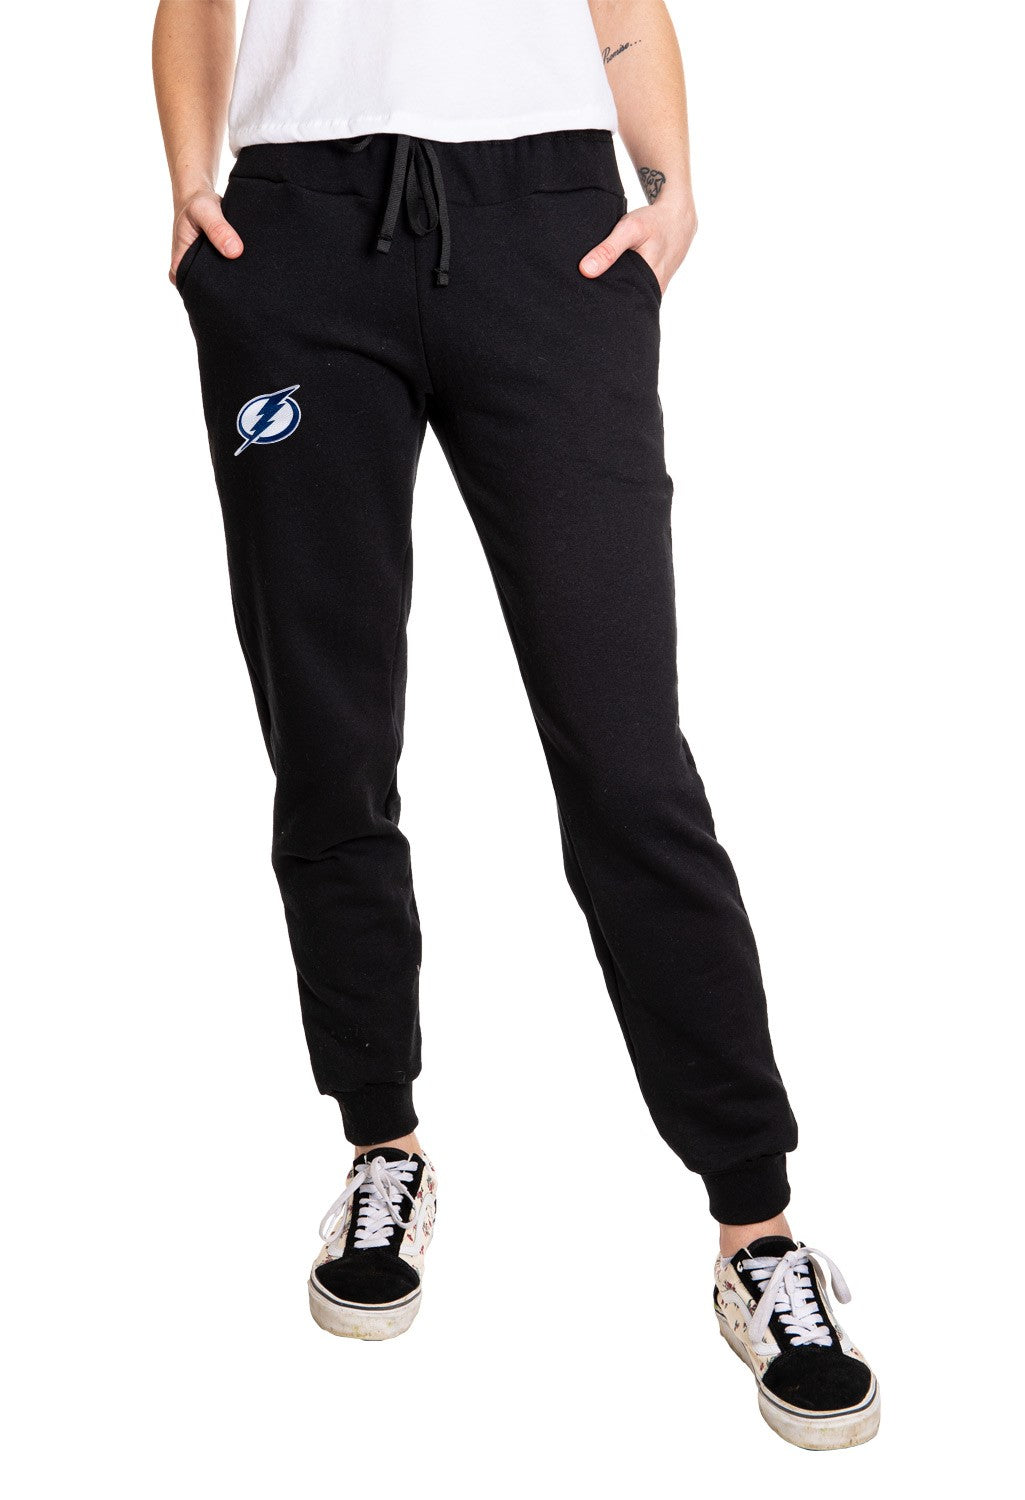 Tampa Bay Lightning Ladies Cuffed Jogger Style Track Pants